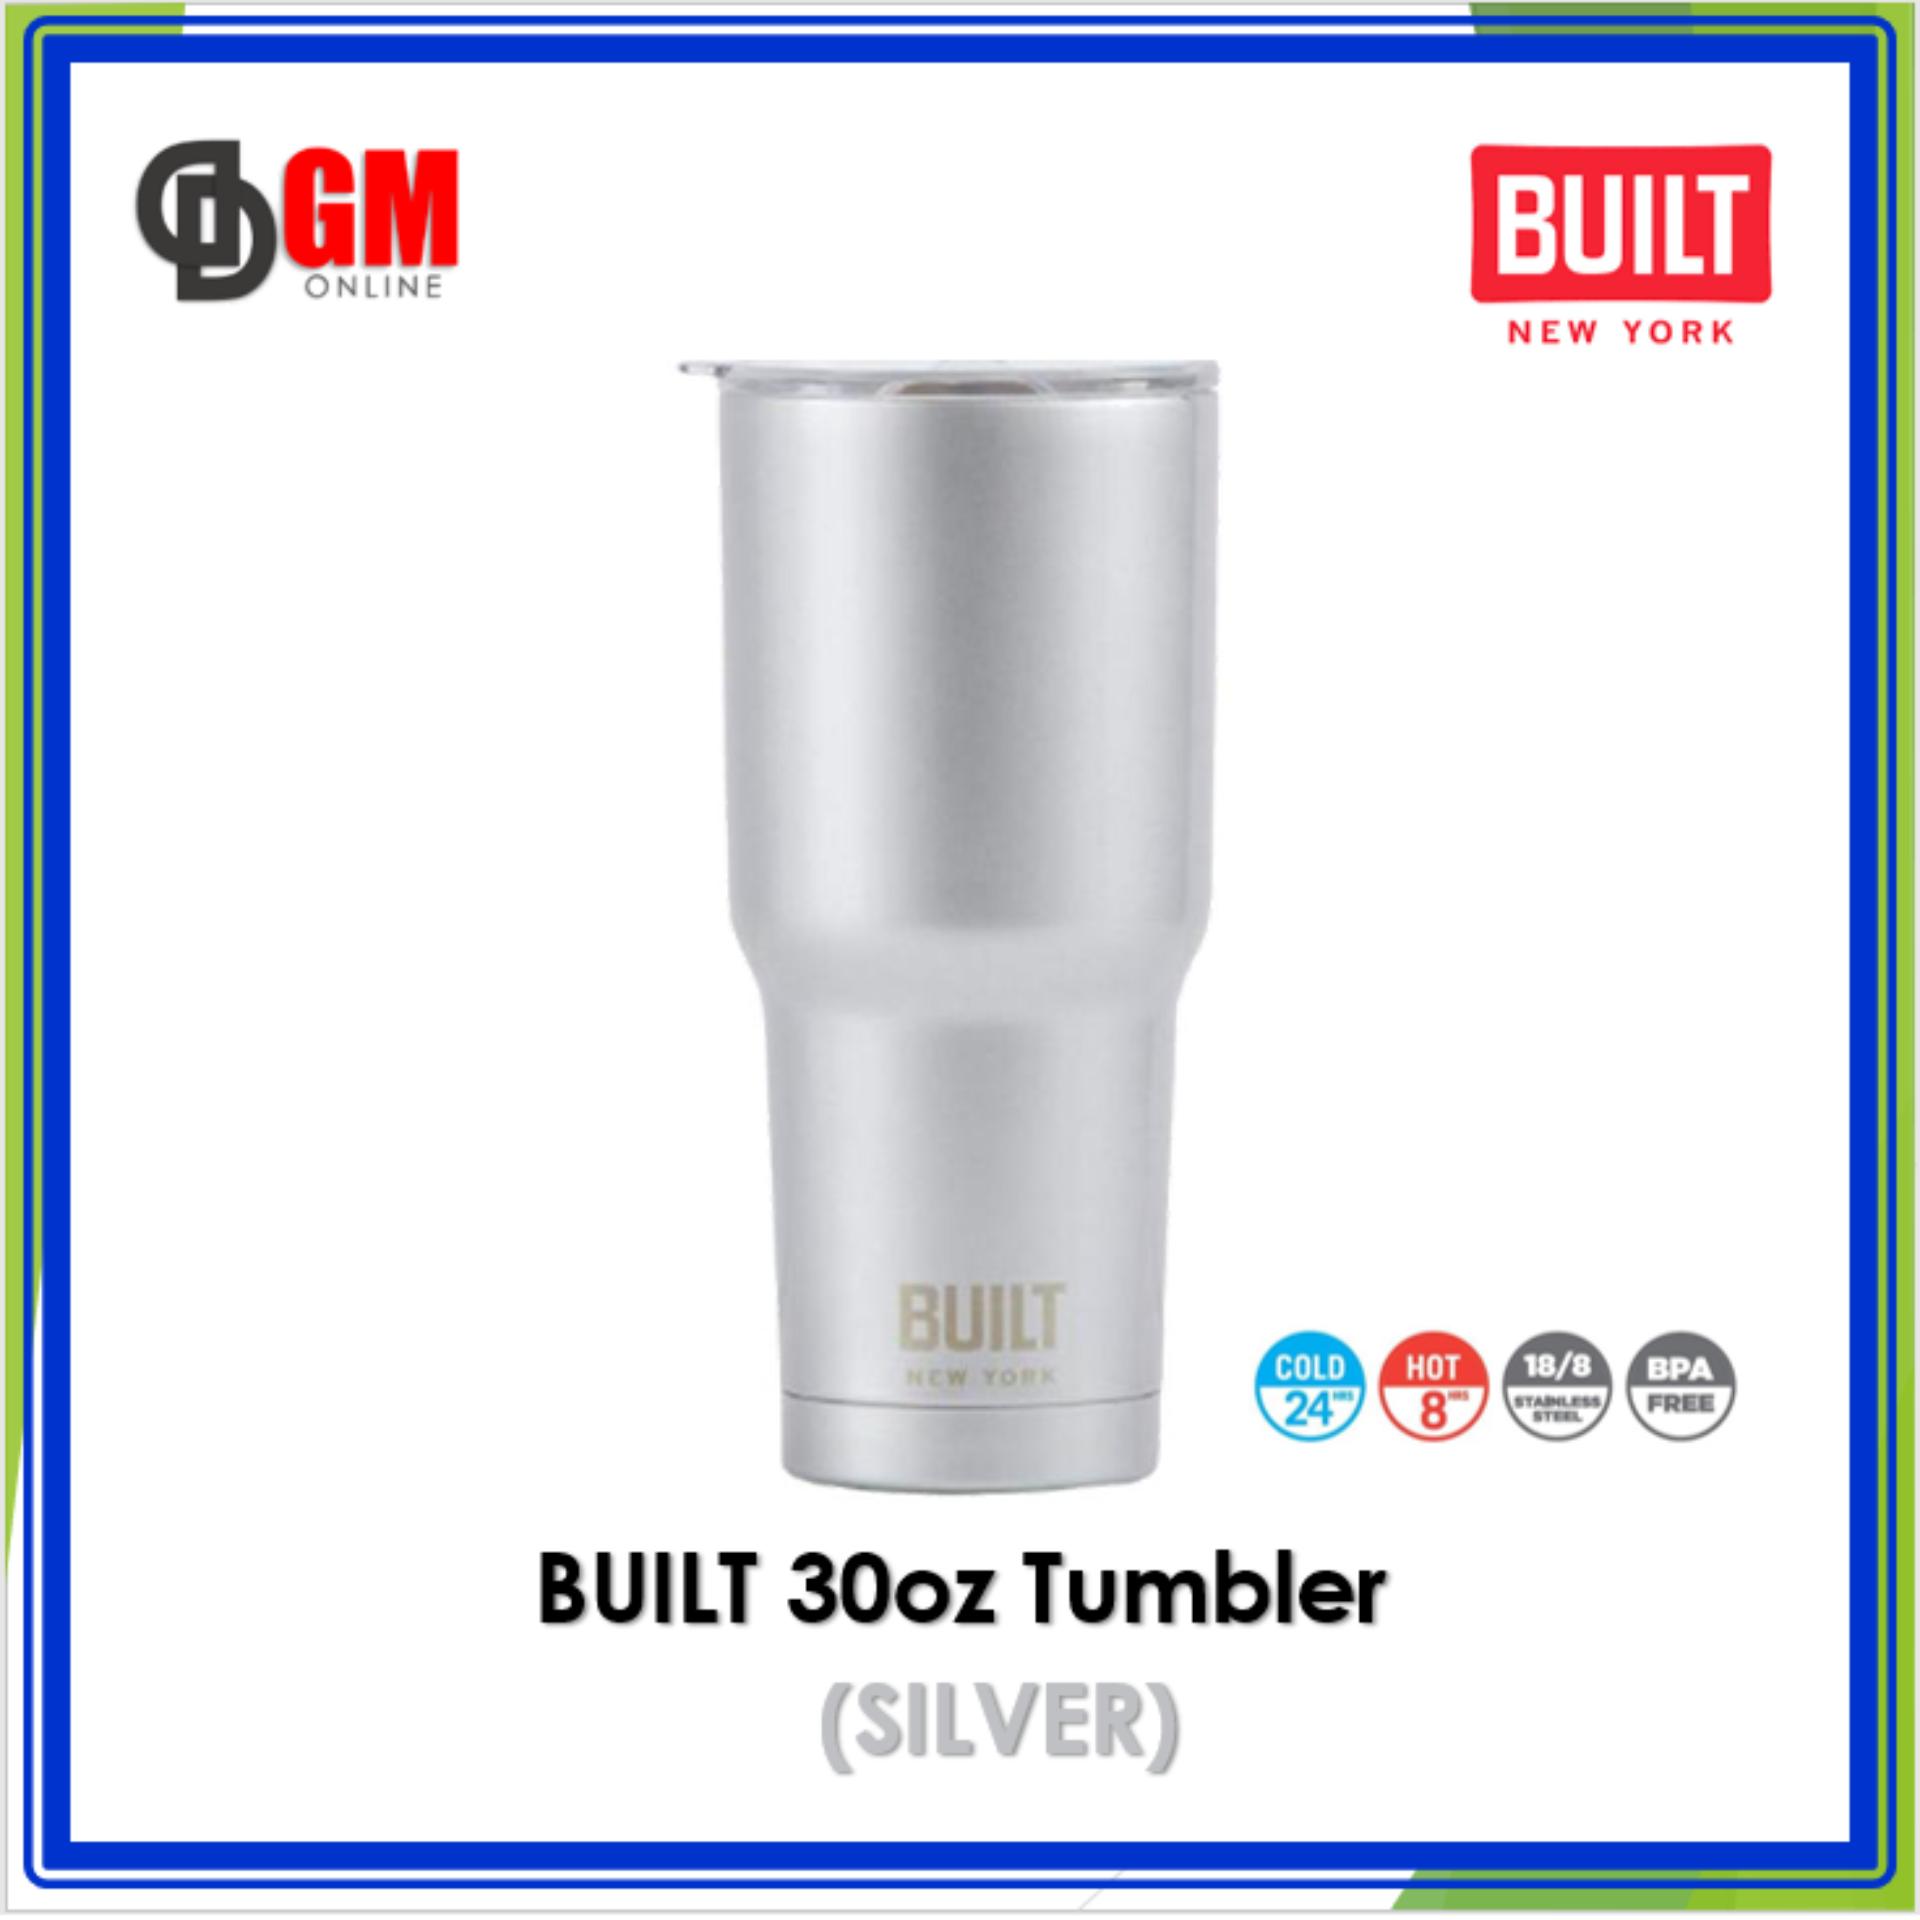 BUILT NY Double Walled Vacuum-Insulated 30oz Tumbler Silver